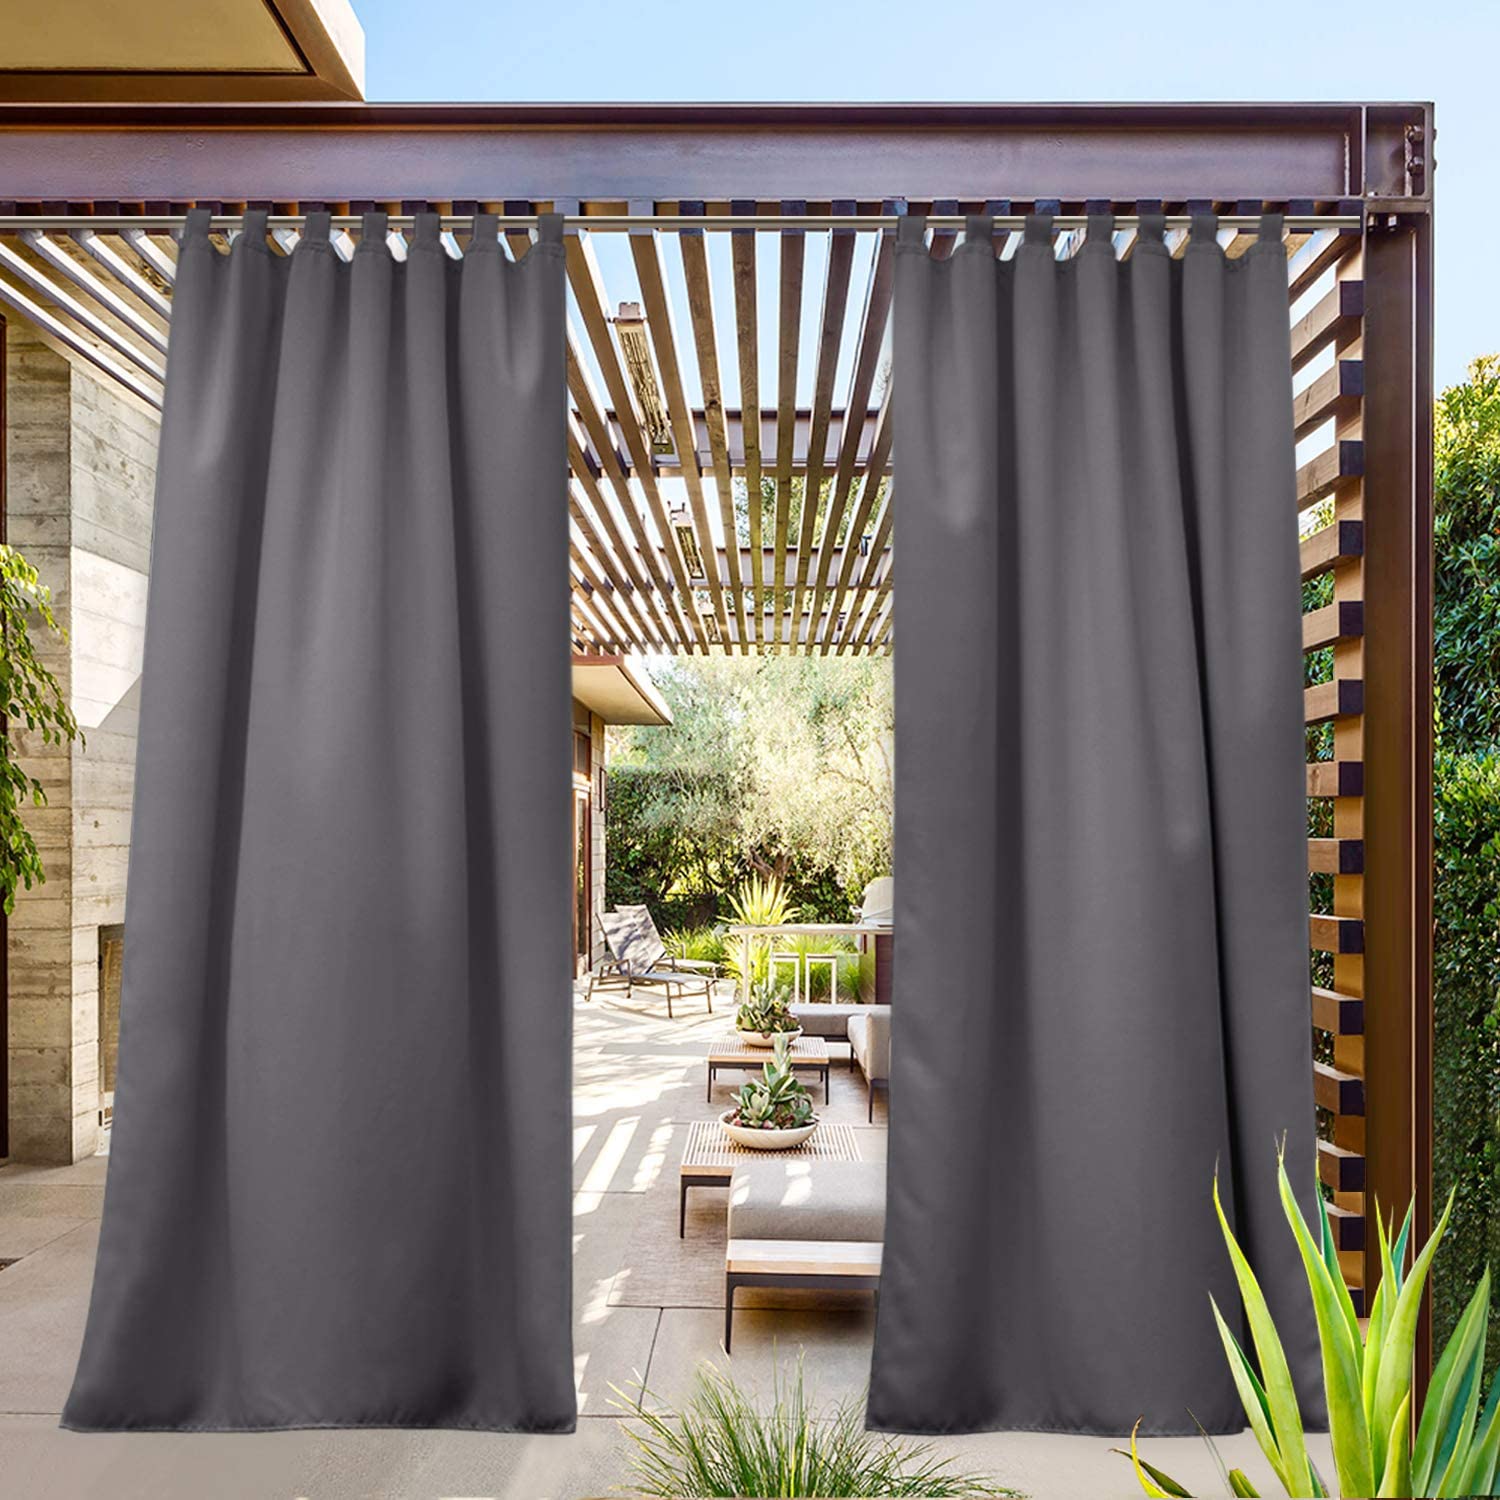 NICETOWN Outdoor Curtain for Patio Waterproof Biscotti Beige Rustproof Grommet Top and Bottom Weighted Outdoor Divider Windproof Thermal Insulated Drape for Balcony / Cabana W100 x L108 1 Panel